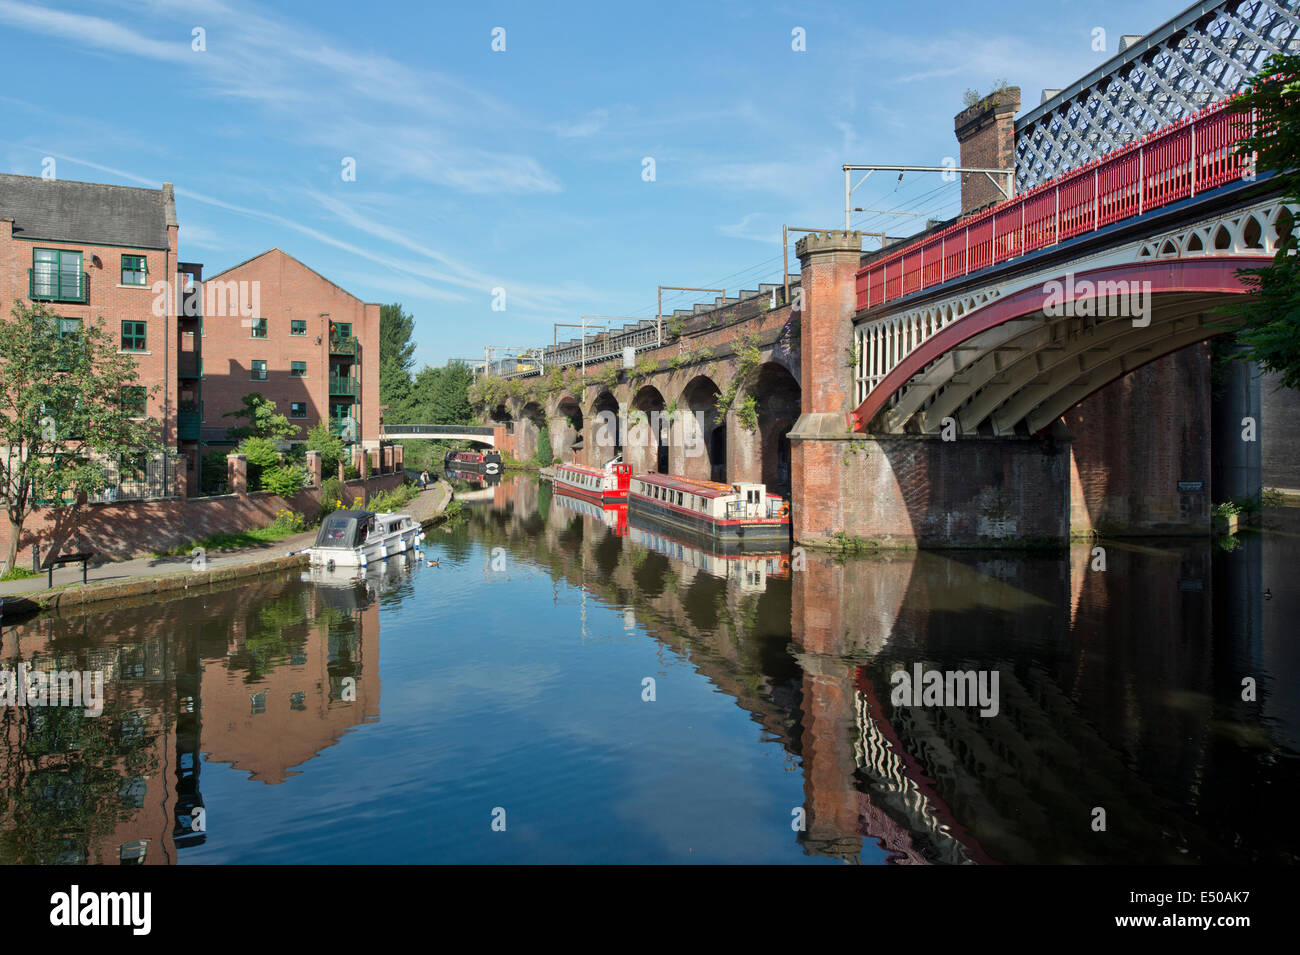 The Castlefield Urban Heritage Park and historic inner city canal conservation area including railway arches in Manchester, UK. Stock Photo